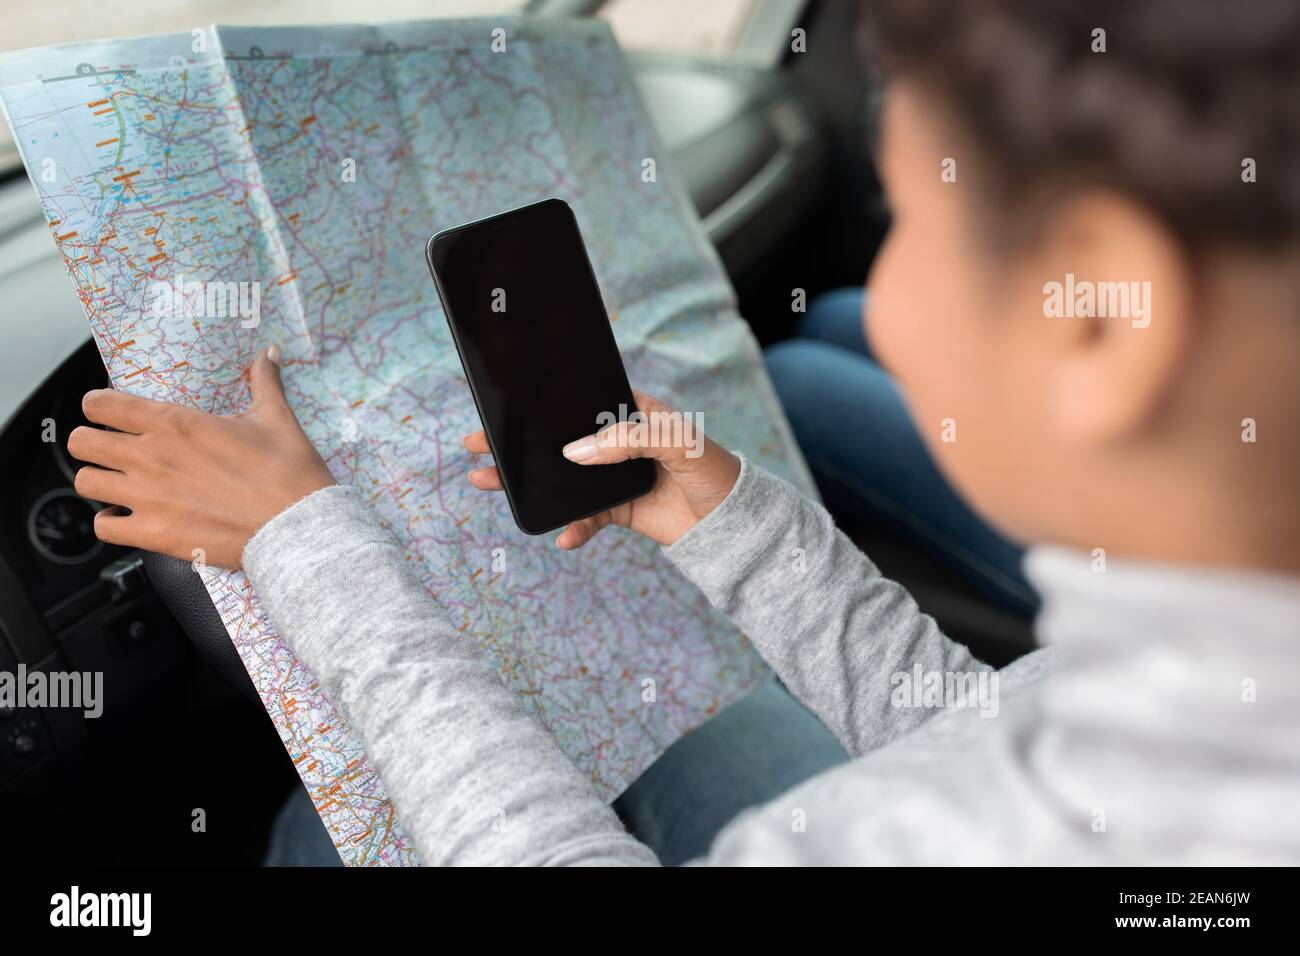 Auto tourist making plans, road trip and vacation Stock Photo